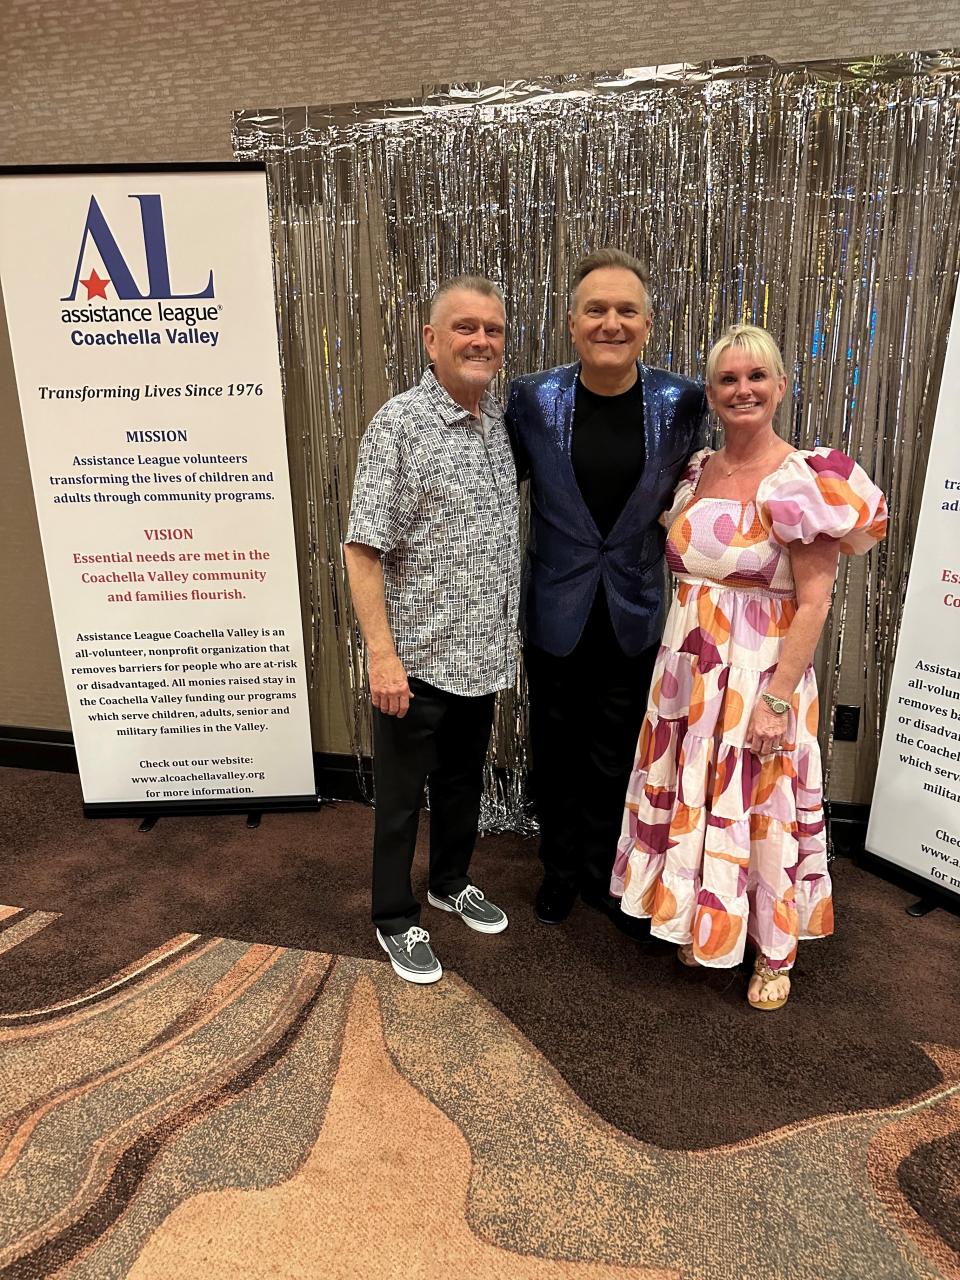 Steve Goodyear, Jeff Hobson and Kellie Kidder pose at the Assistance League Coachella Valley's annual fundraiser, held March 7, 2024, in Rancho Mirage, Calif.